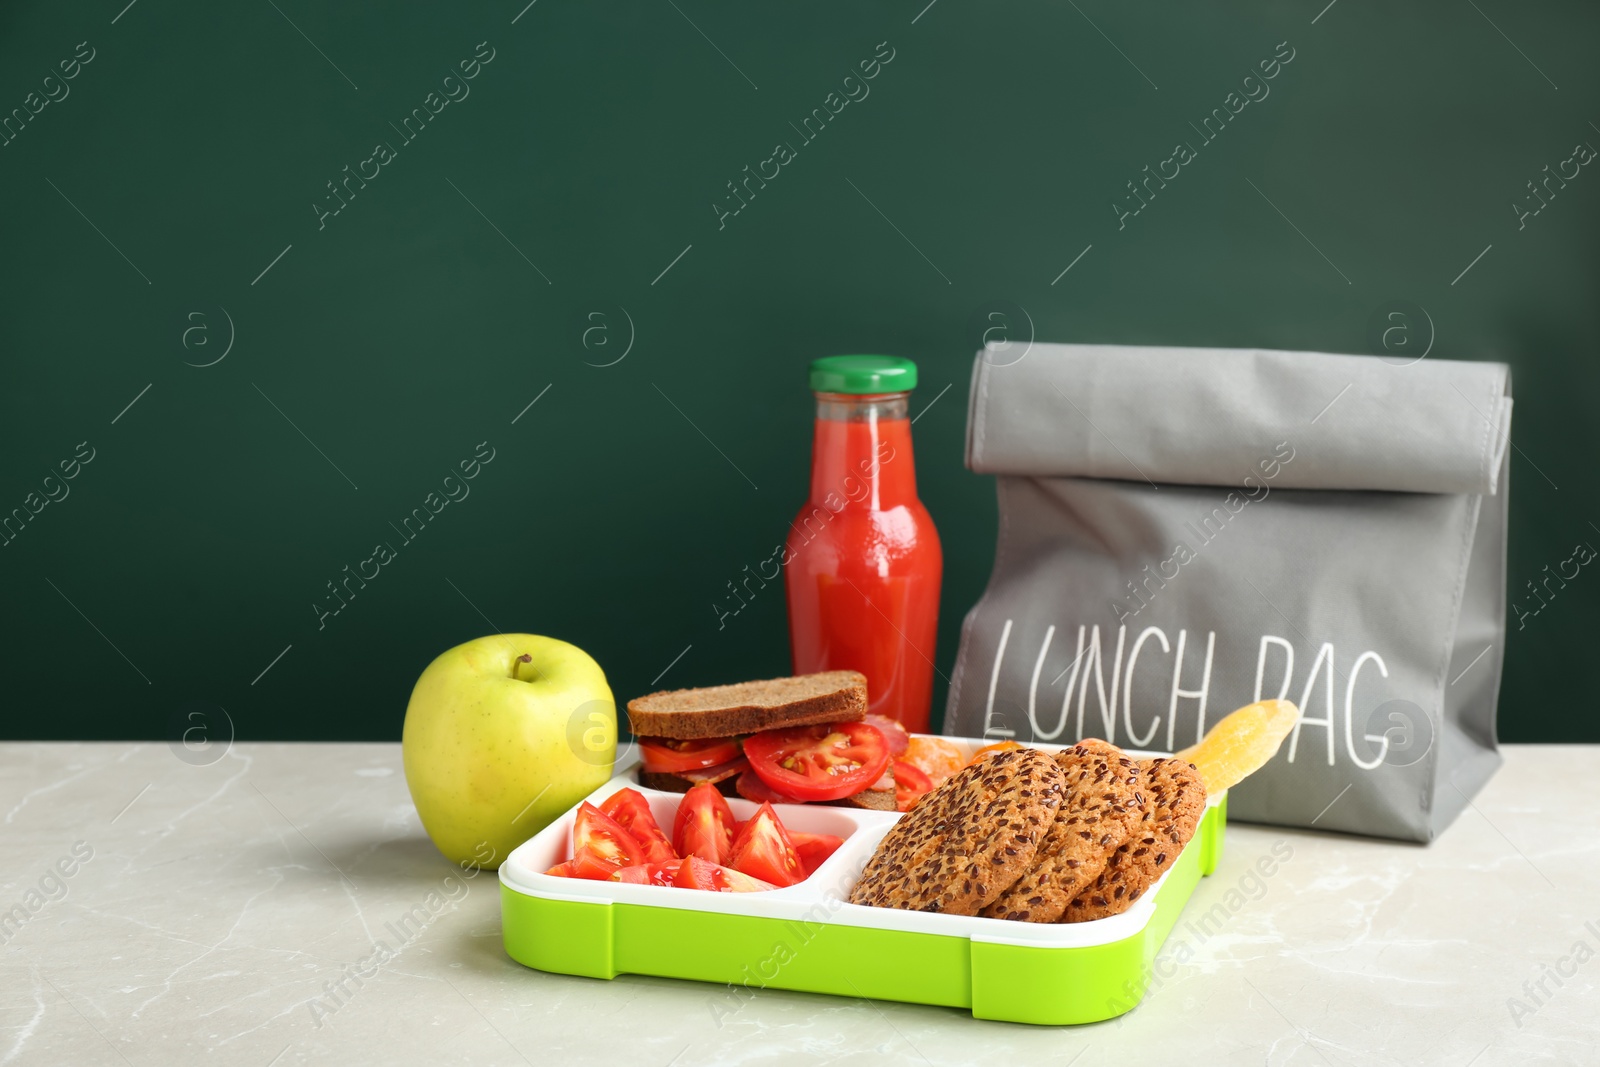 Photo of Lunch box with appetizing food and bag on table near chalkboard